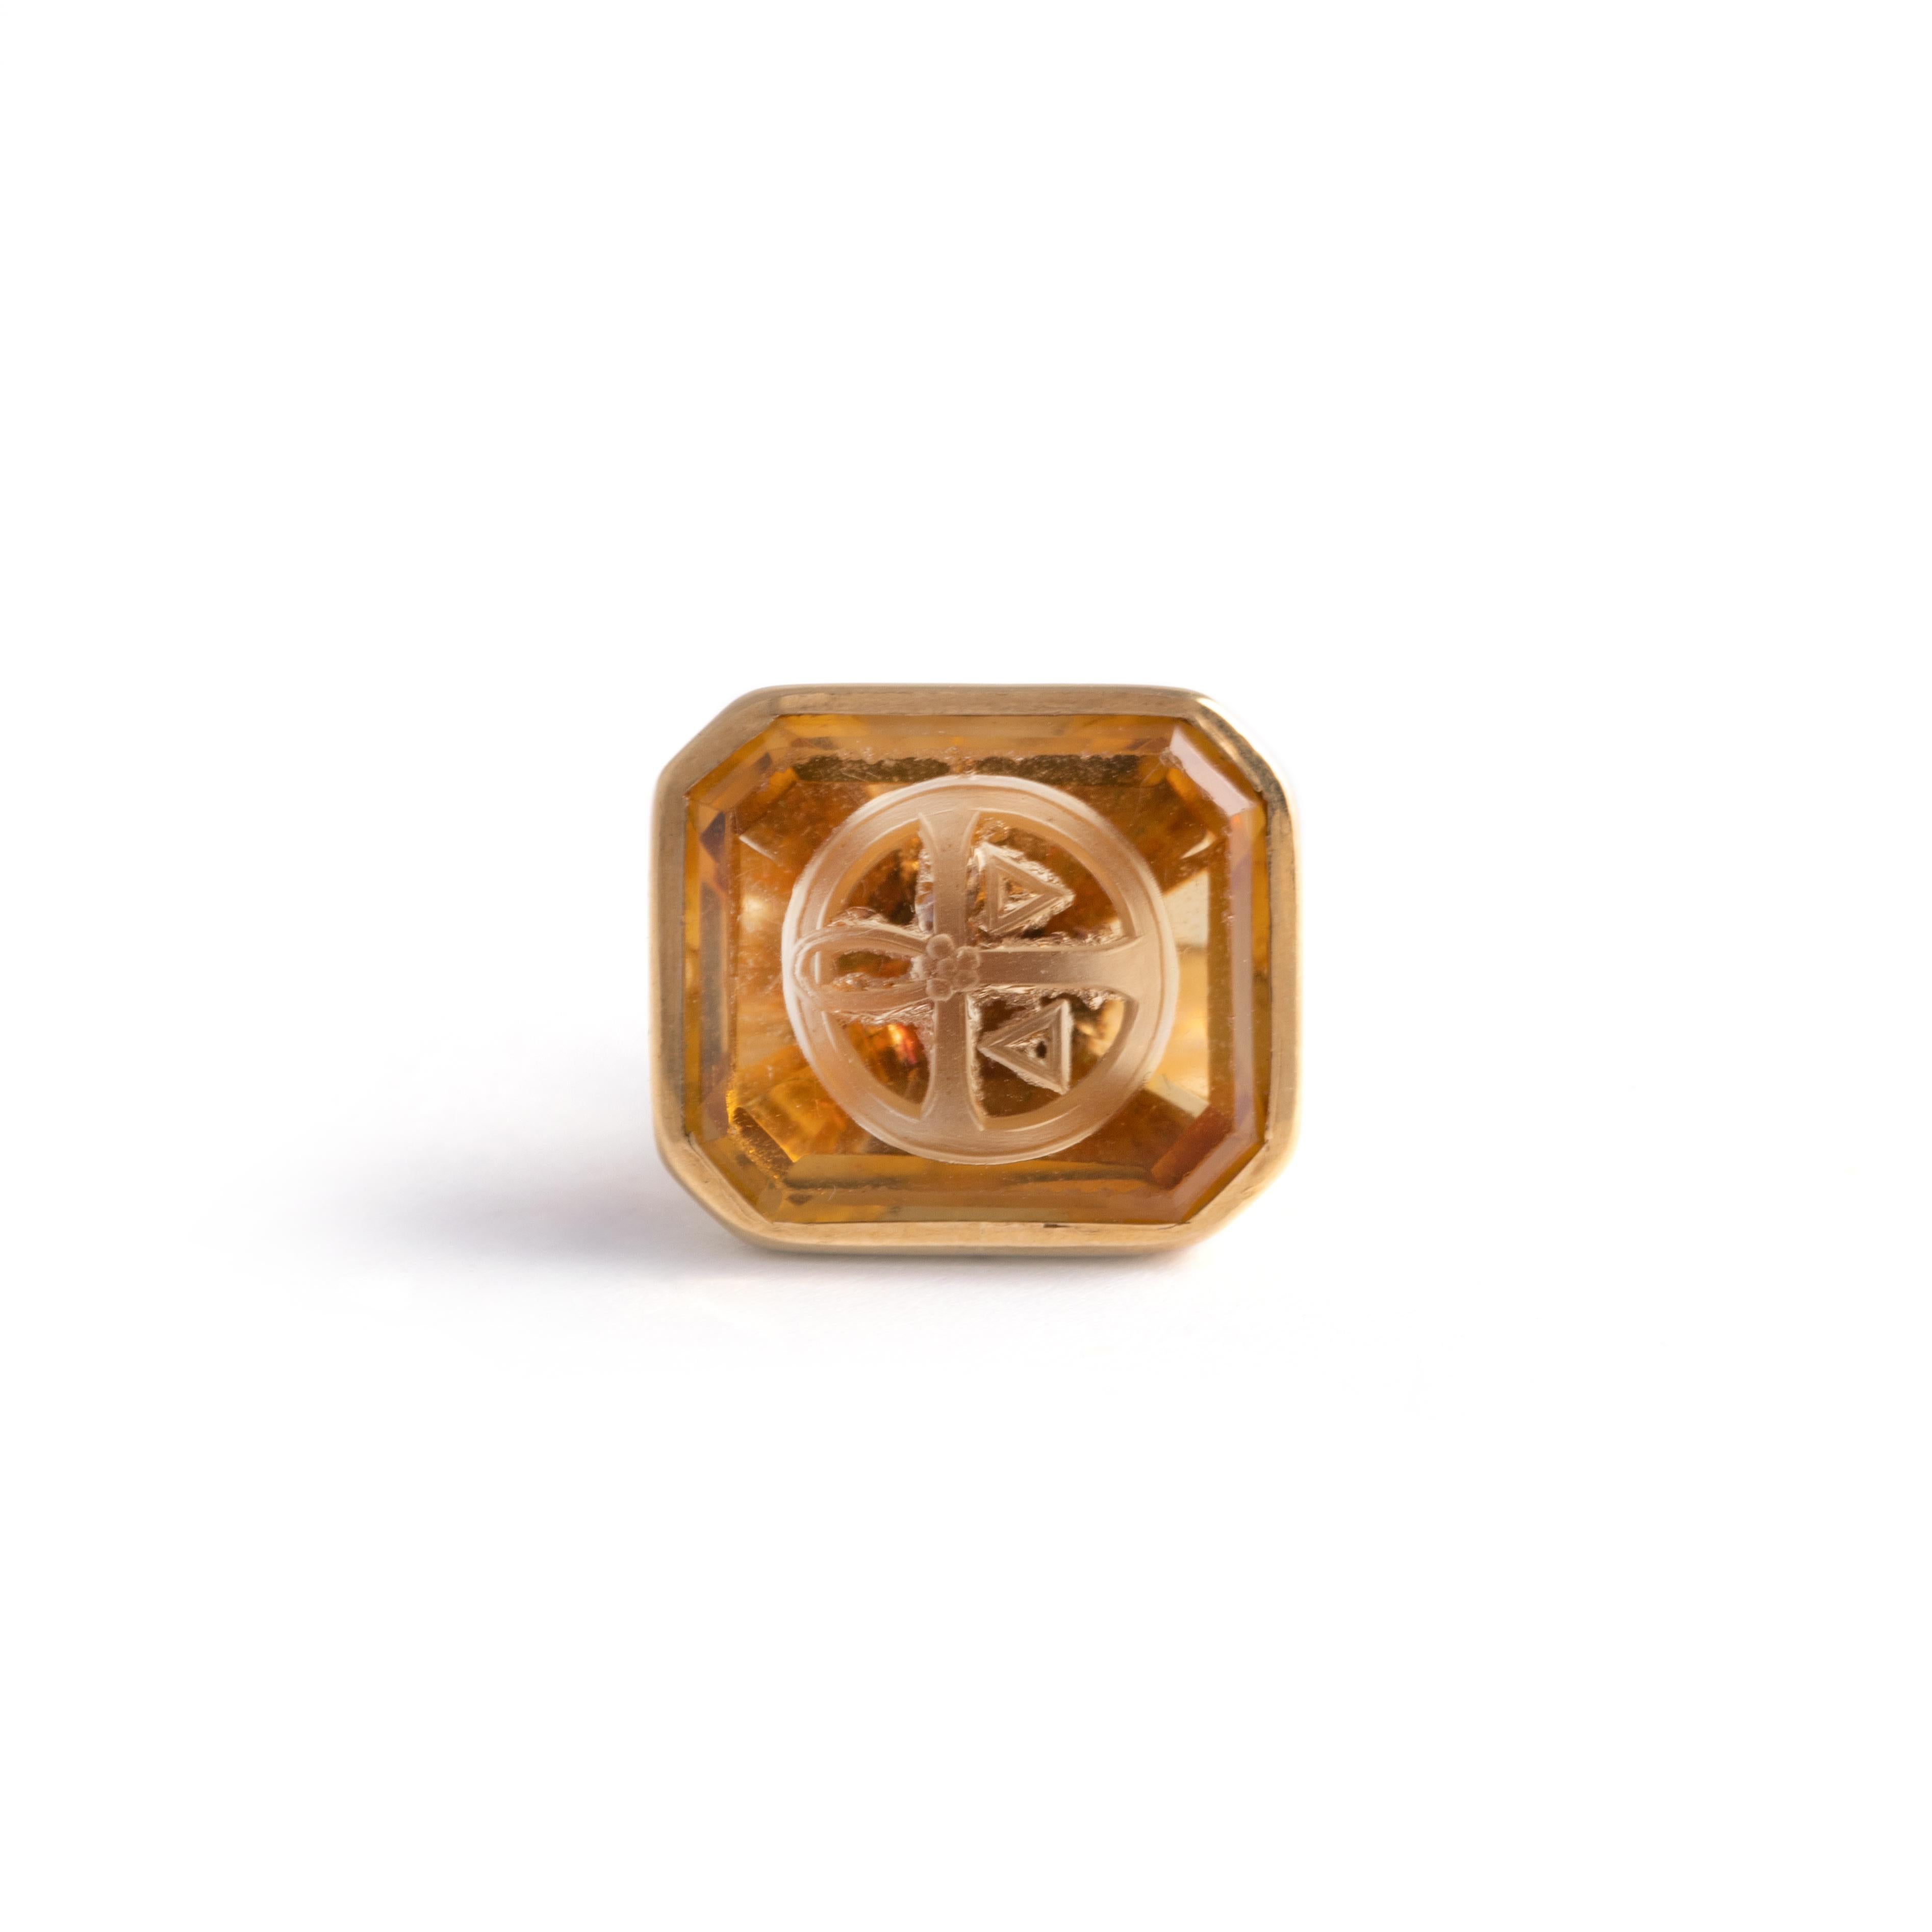 14K gold seal holding an intaglio on an orange stone.
Dimensions: 1.40 centimeters x 1.20 centimeters. 
Gross weight: 2.88 grams.